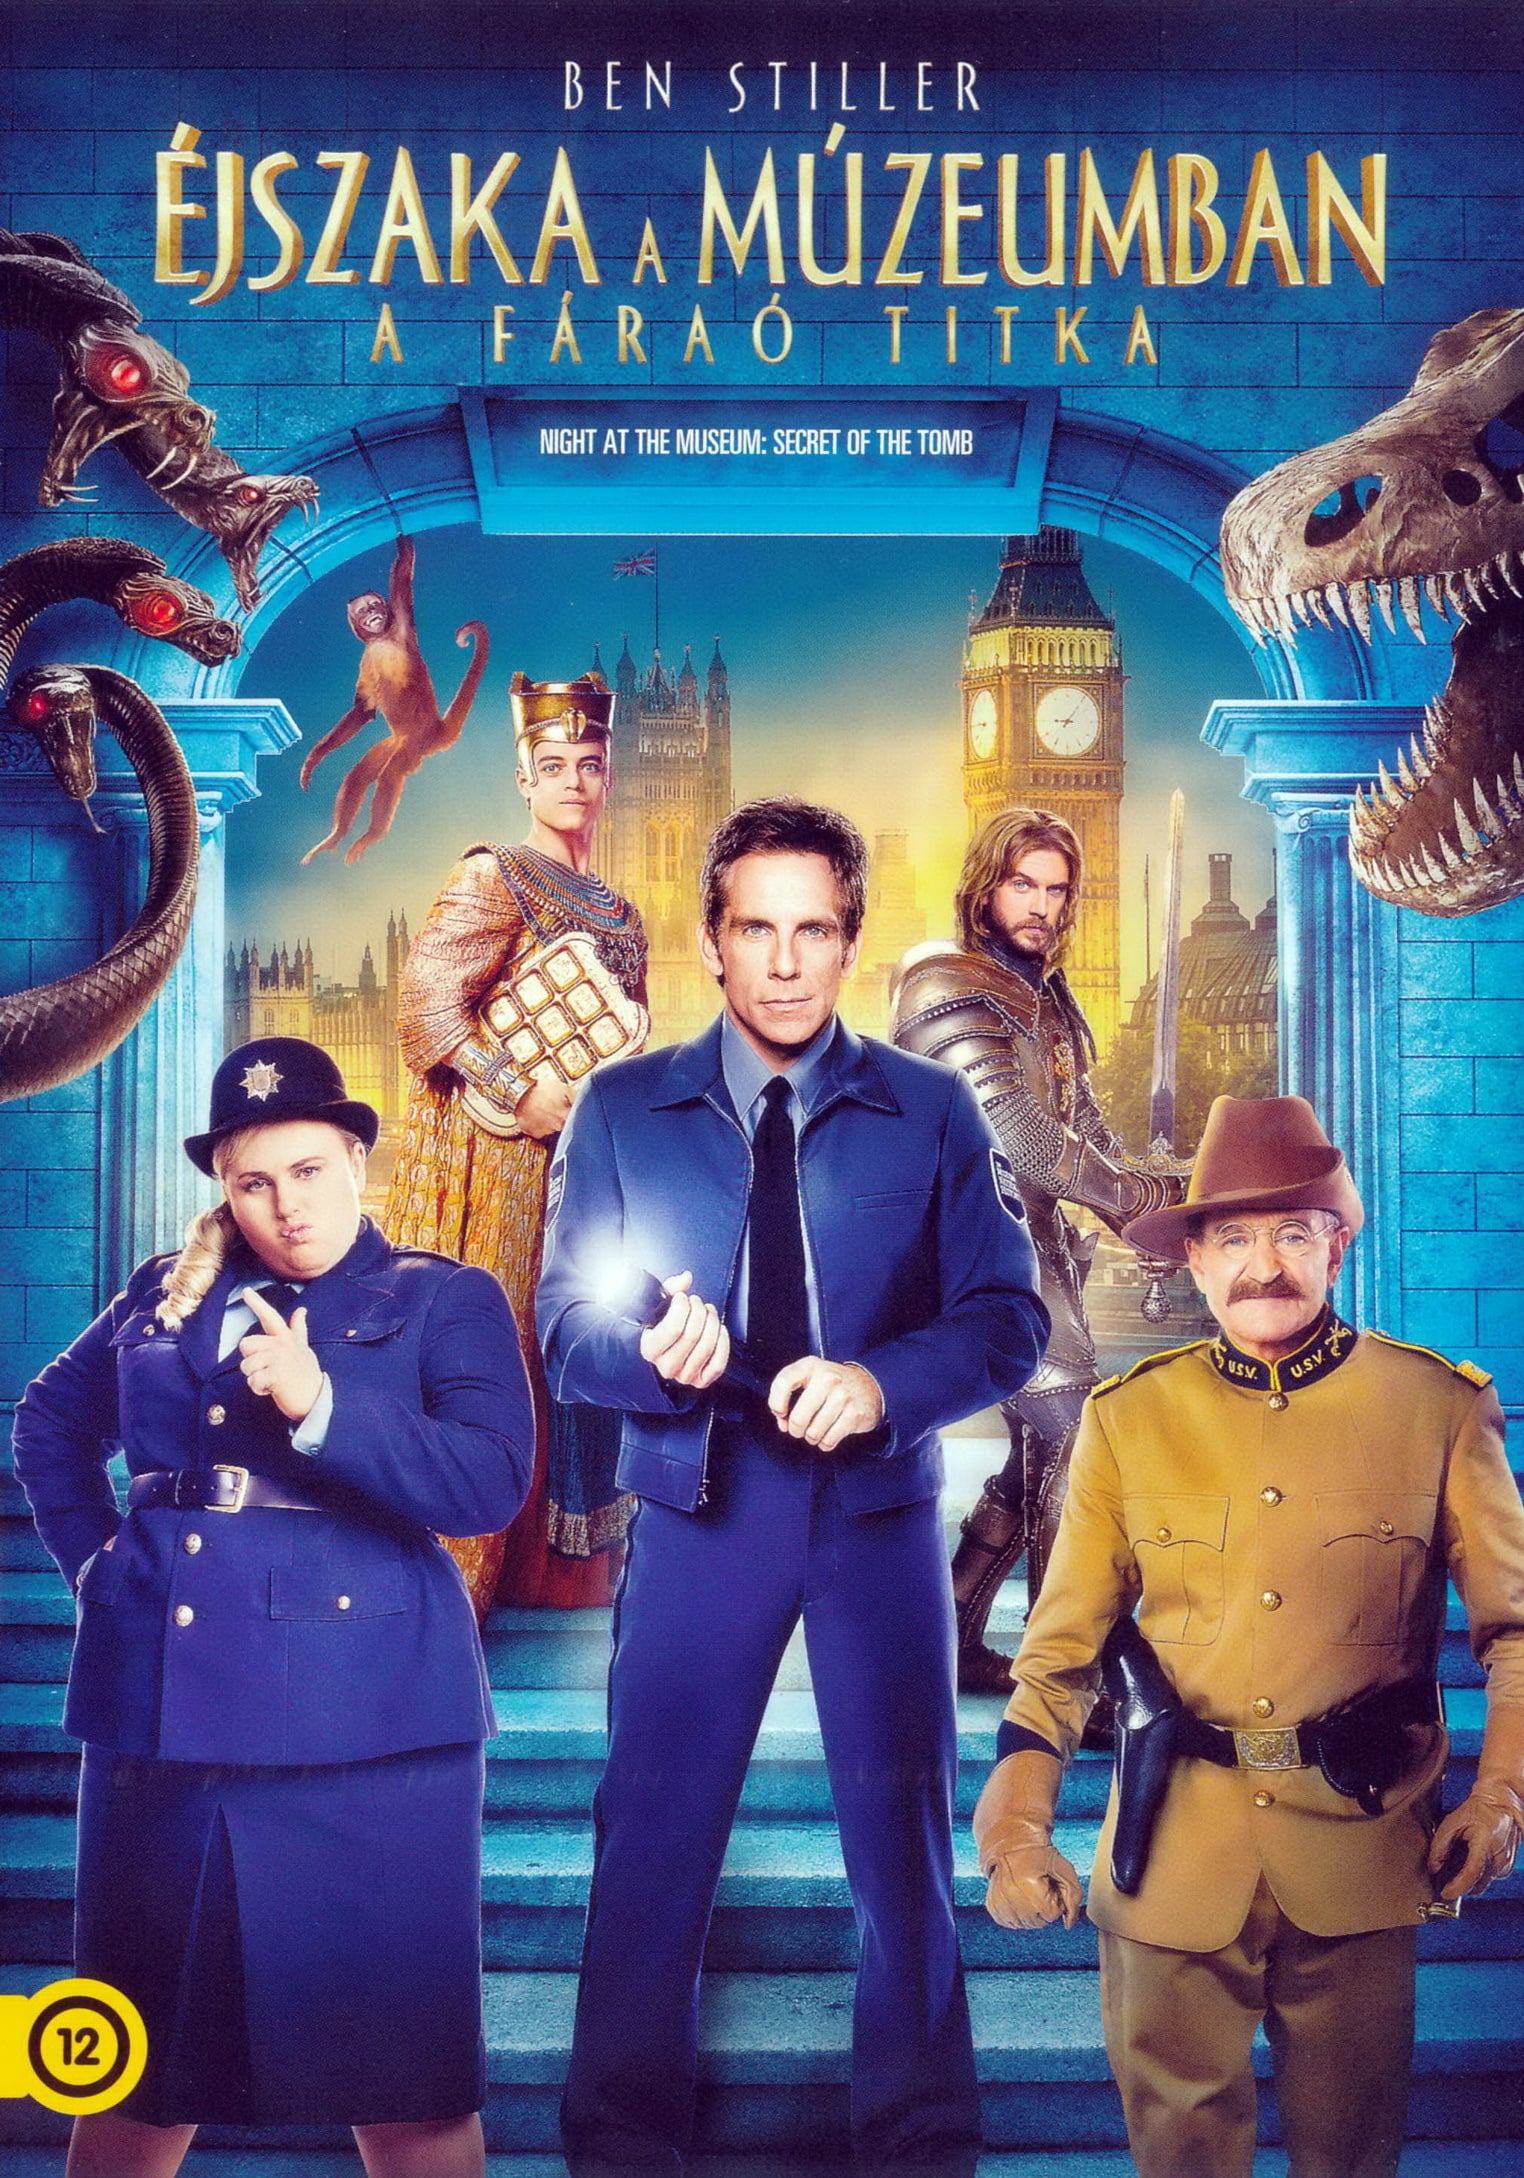 night at the museum 2 in hindi 480p tv